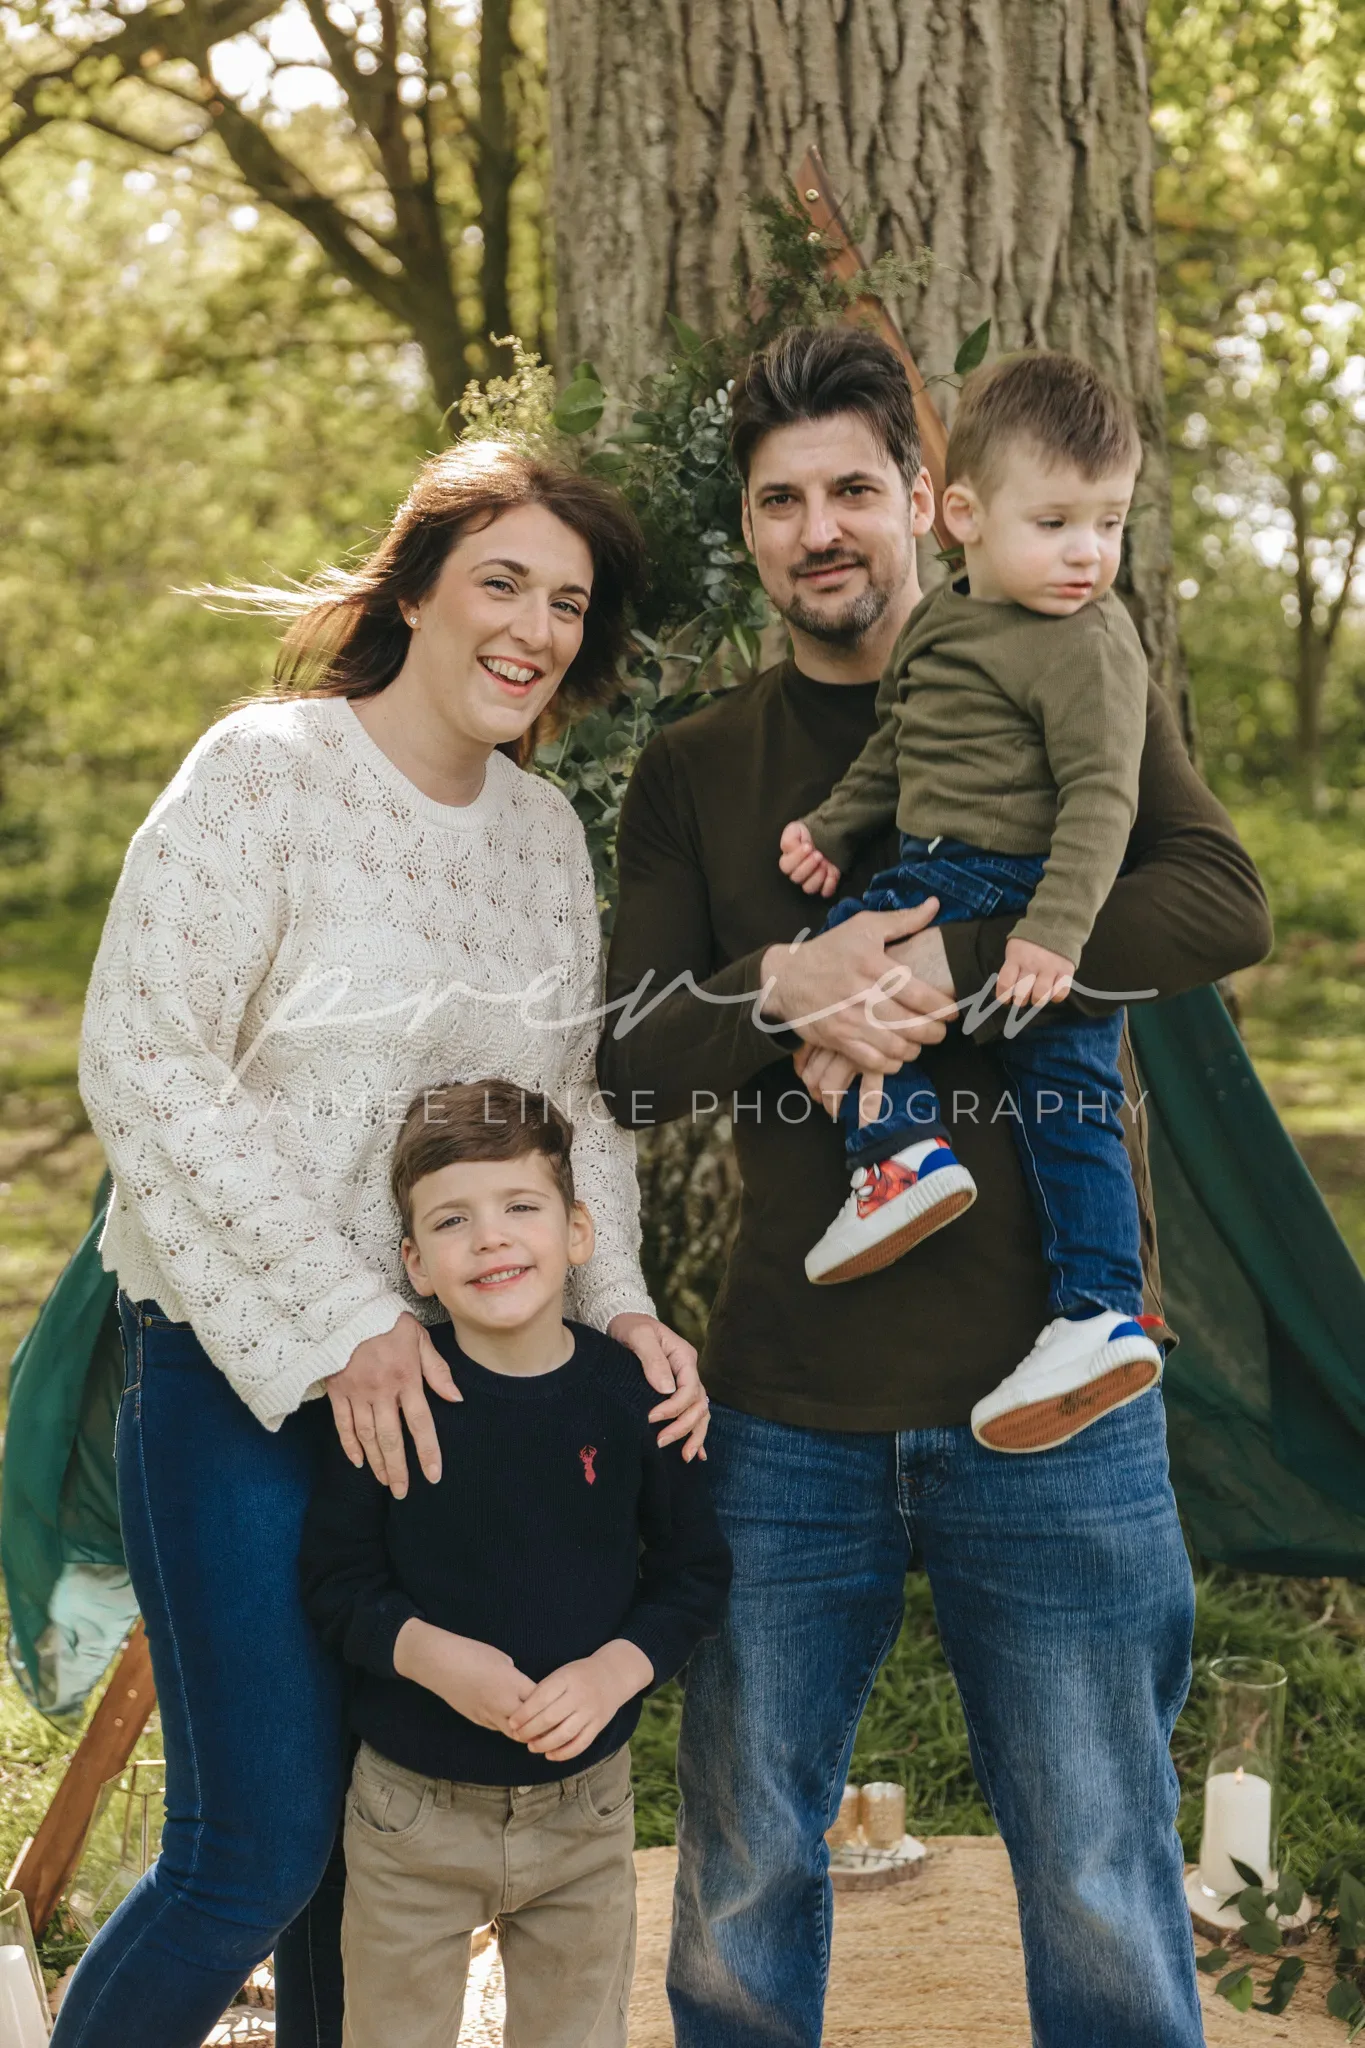 A happy family of four posing outdoors in a park. the mother and father are standing with their young son between them; the father holds a toddler on his hip. all are smiling, surrounded by lush greenery.